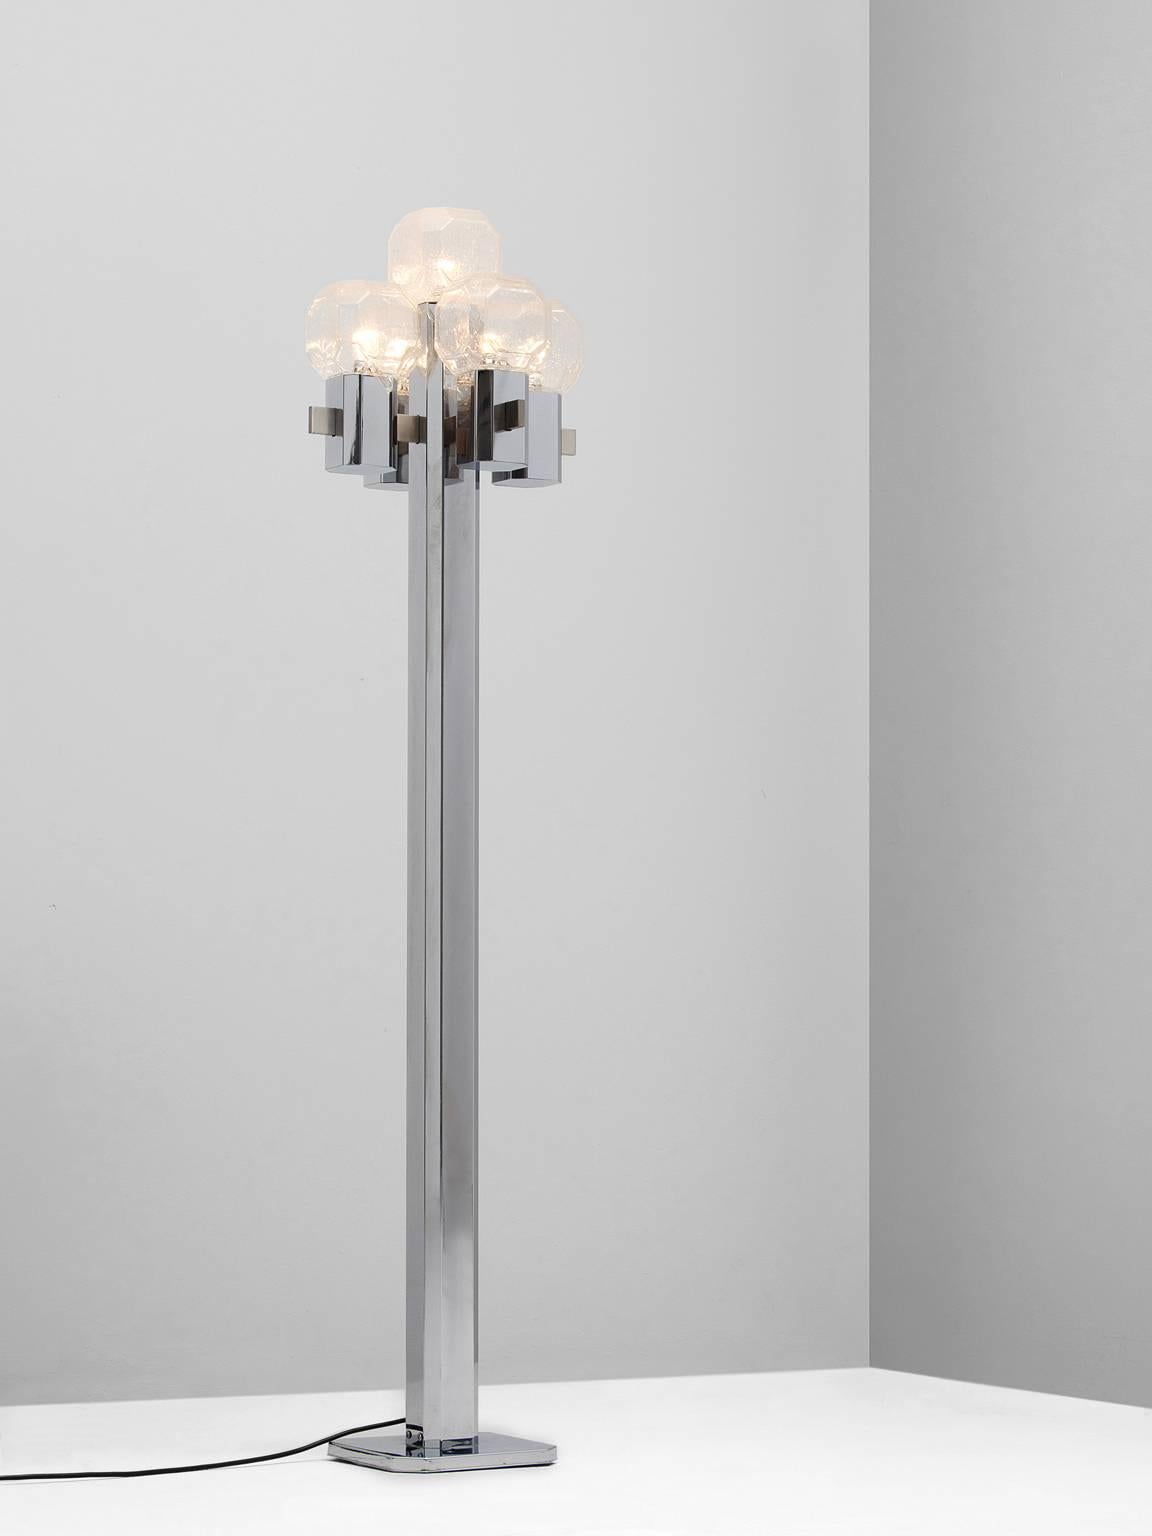 Floor lamp in chrome and glass, Italy, 1970s.
Attributed to Gaetano Sciolari.

The design of this floor lamp is build up out of cubes with rounded edges. Chrome base and stem. Five light-points wit raindrop glass spheres, piled like dices. The